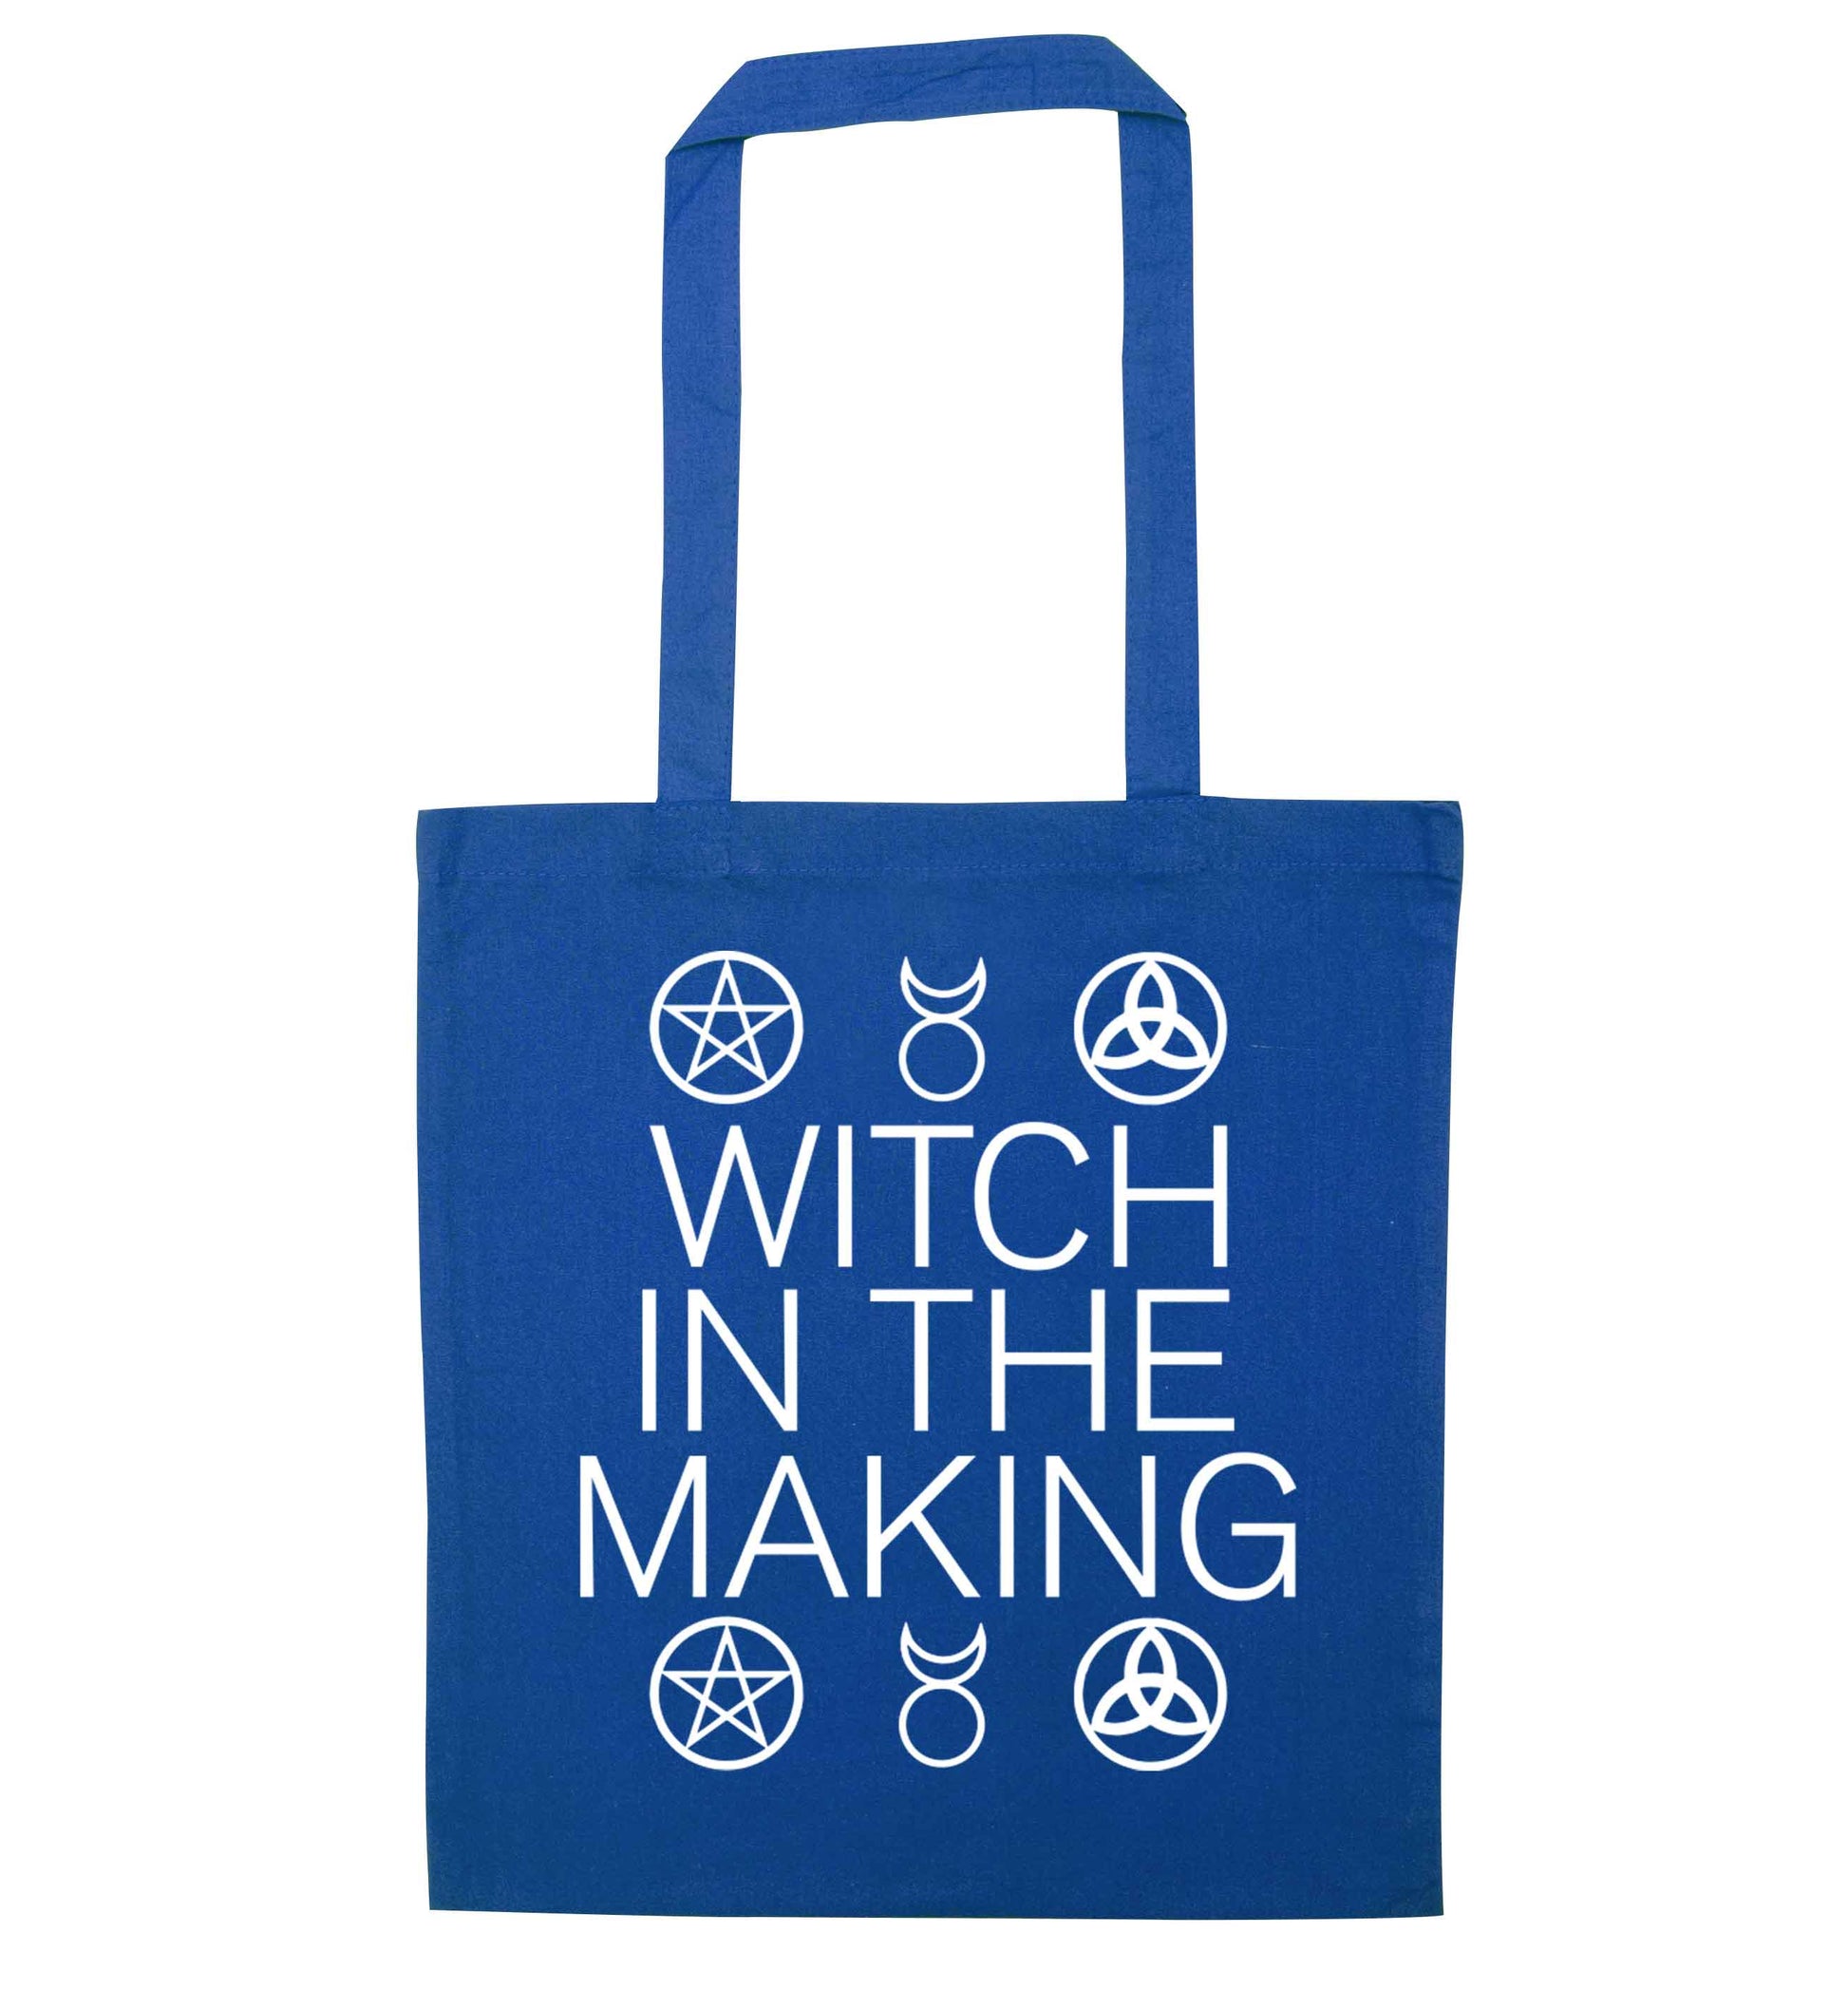 Witch in the making blue tote bag